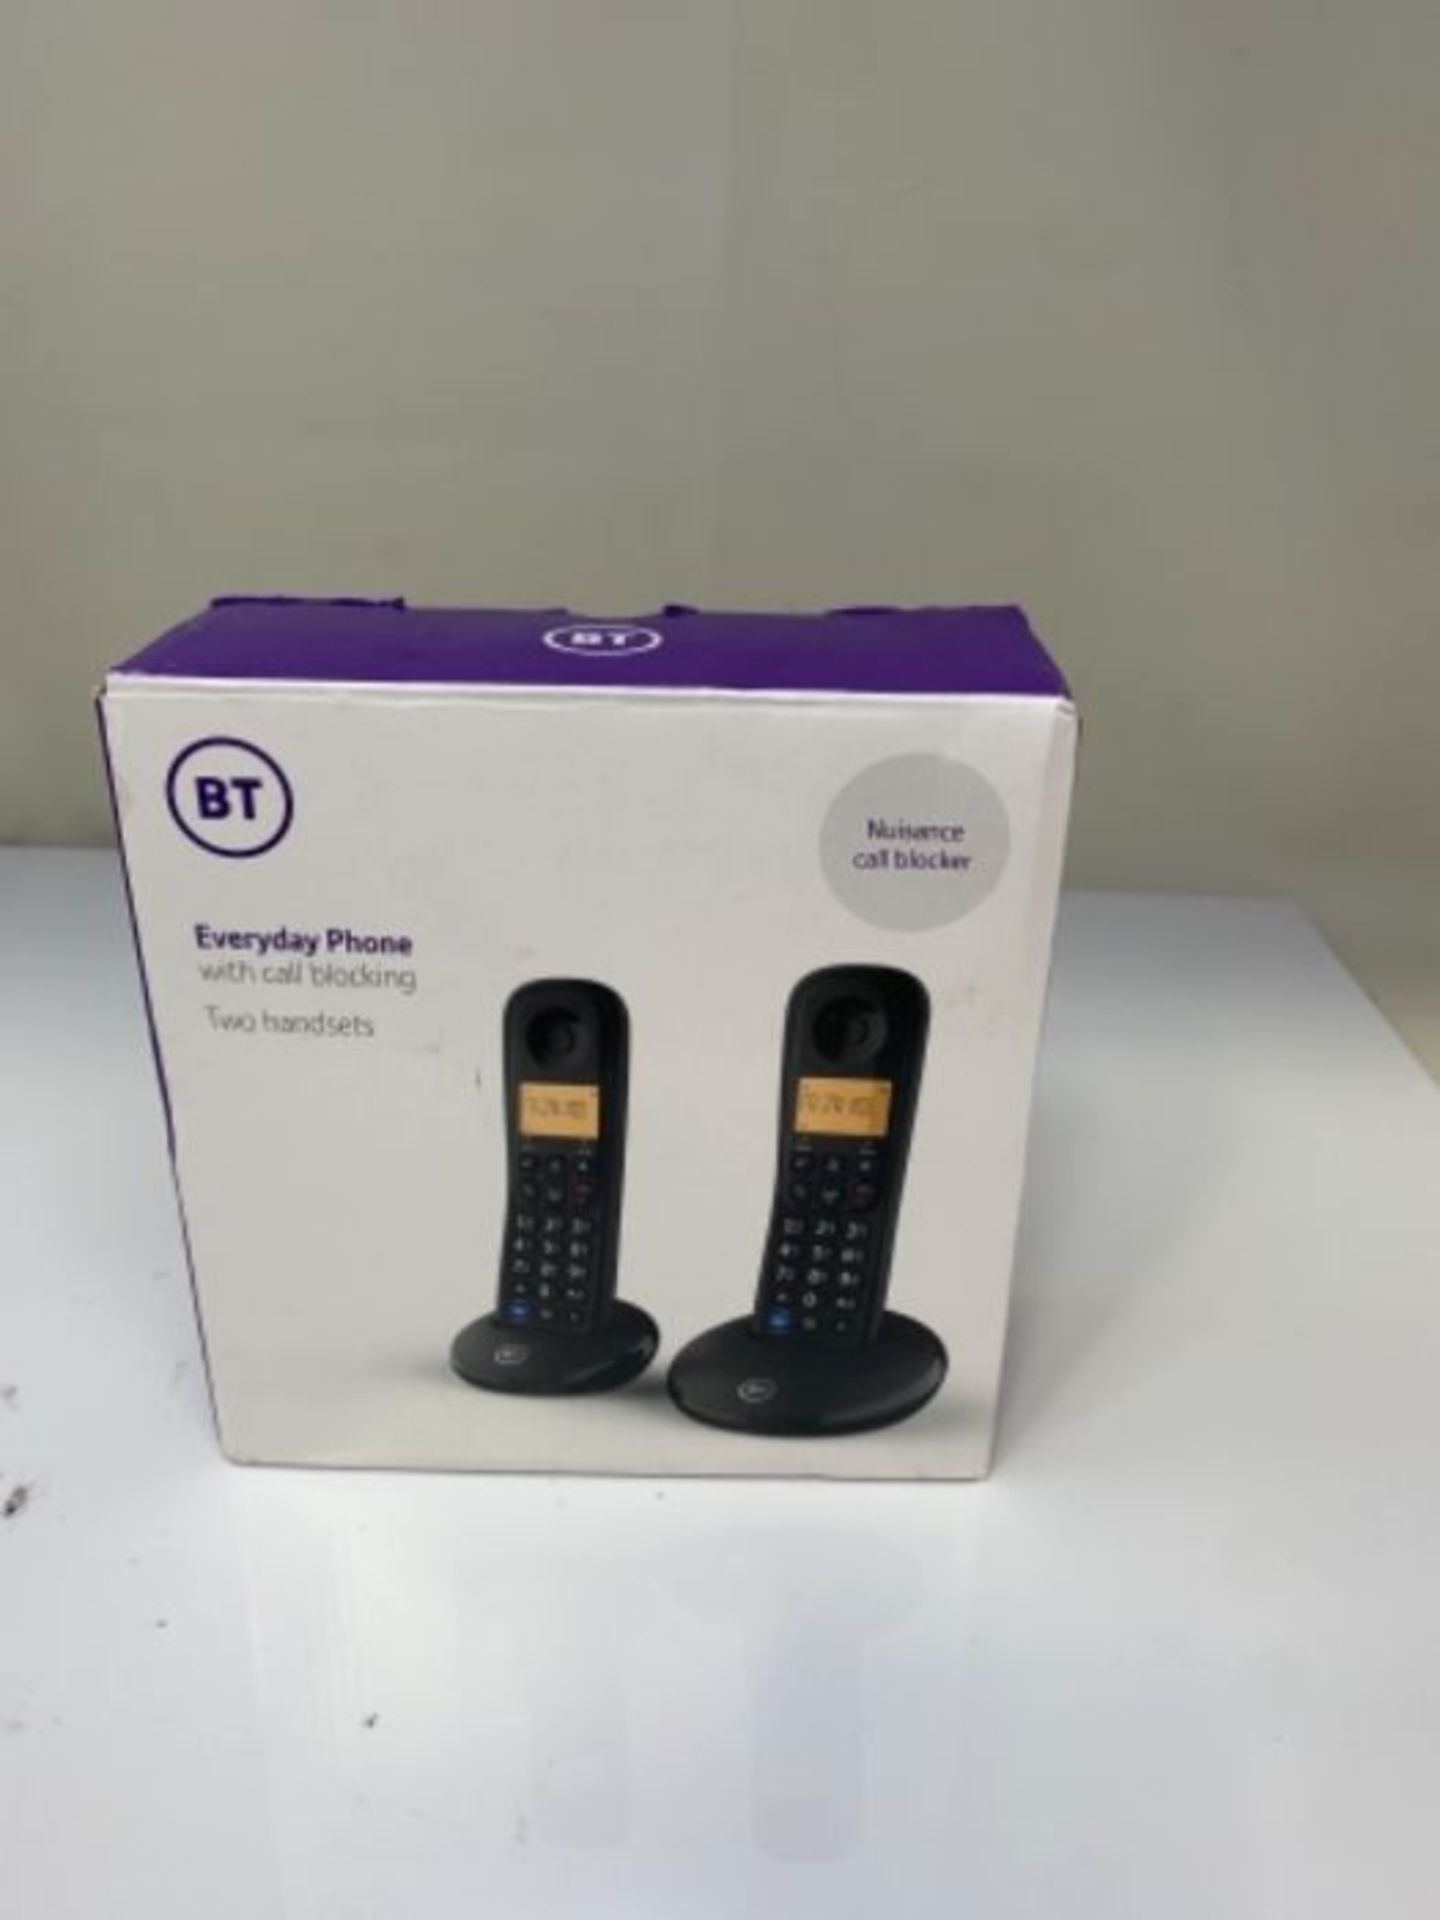 BT Everyday Cordless Home Phone with Basic Call Blocking, Twin Handset Pack, Black - Image 2 of 3